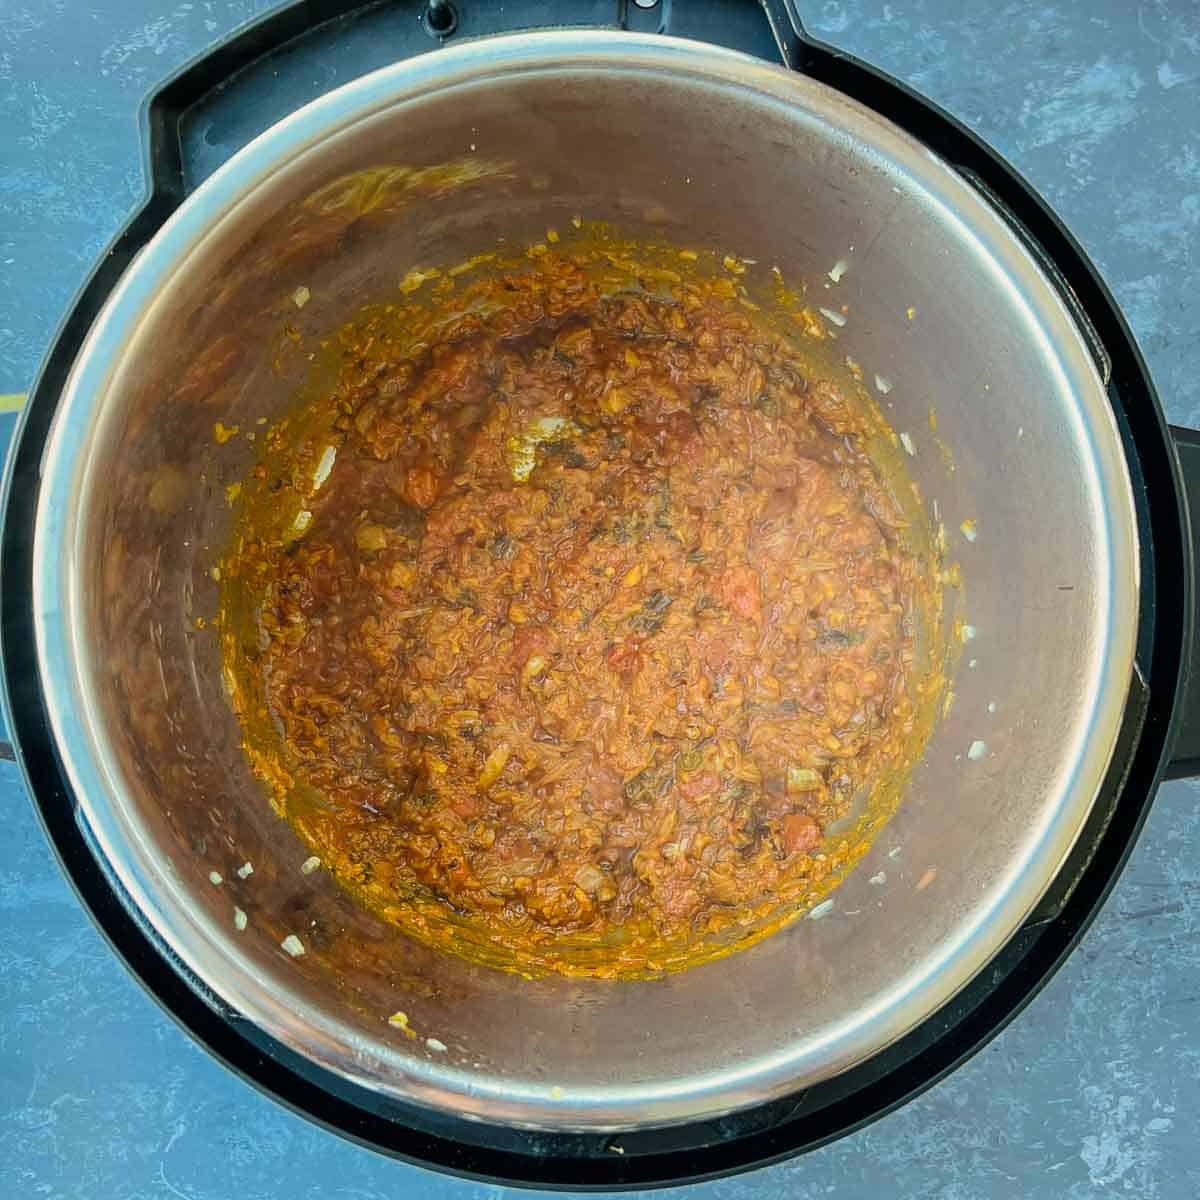 Cooked tomato and spices in Instant Pot.